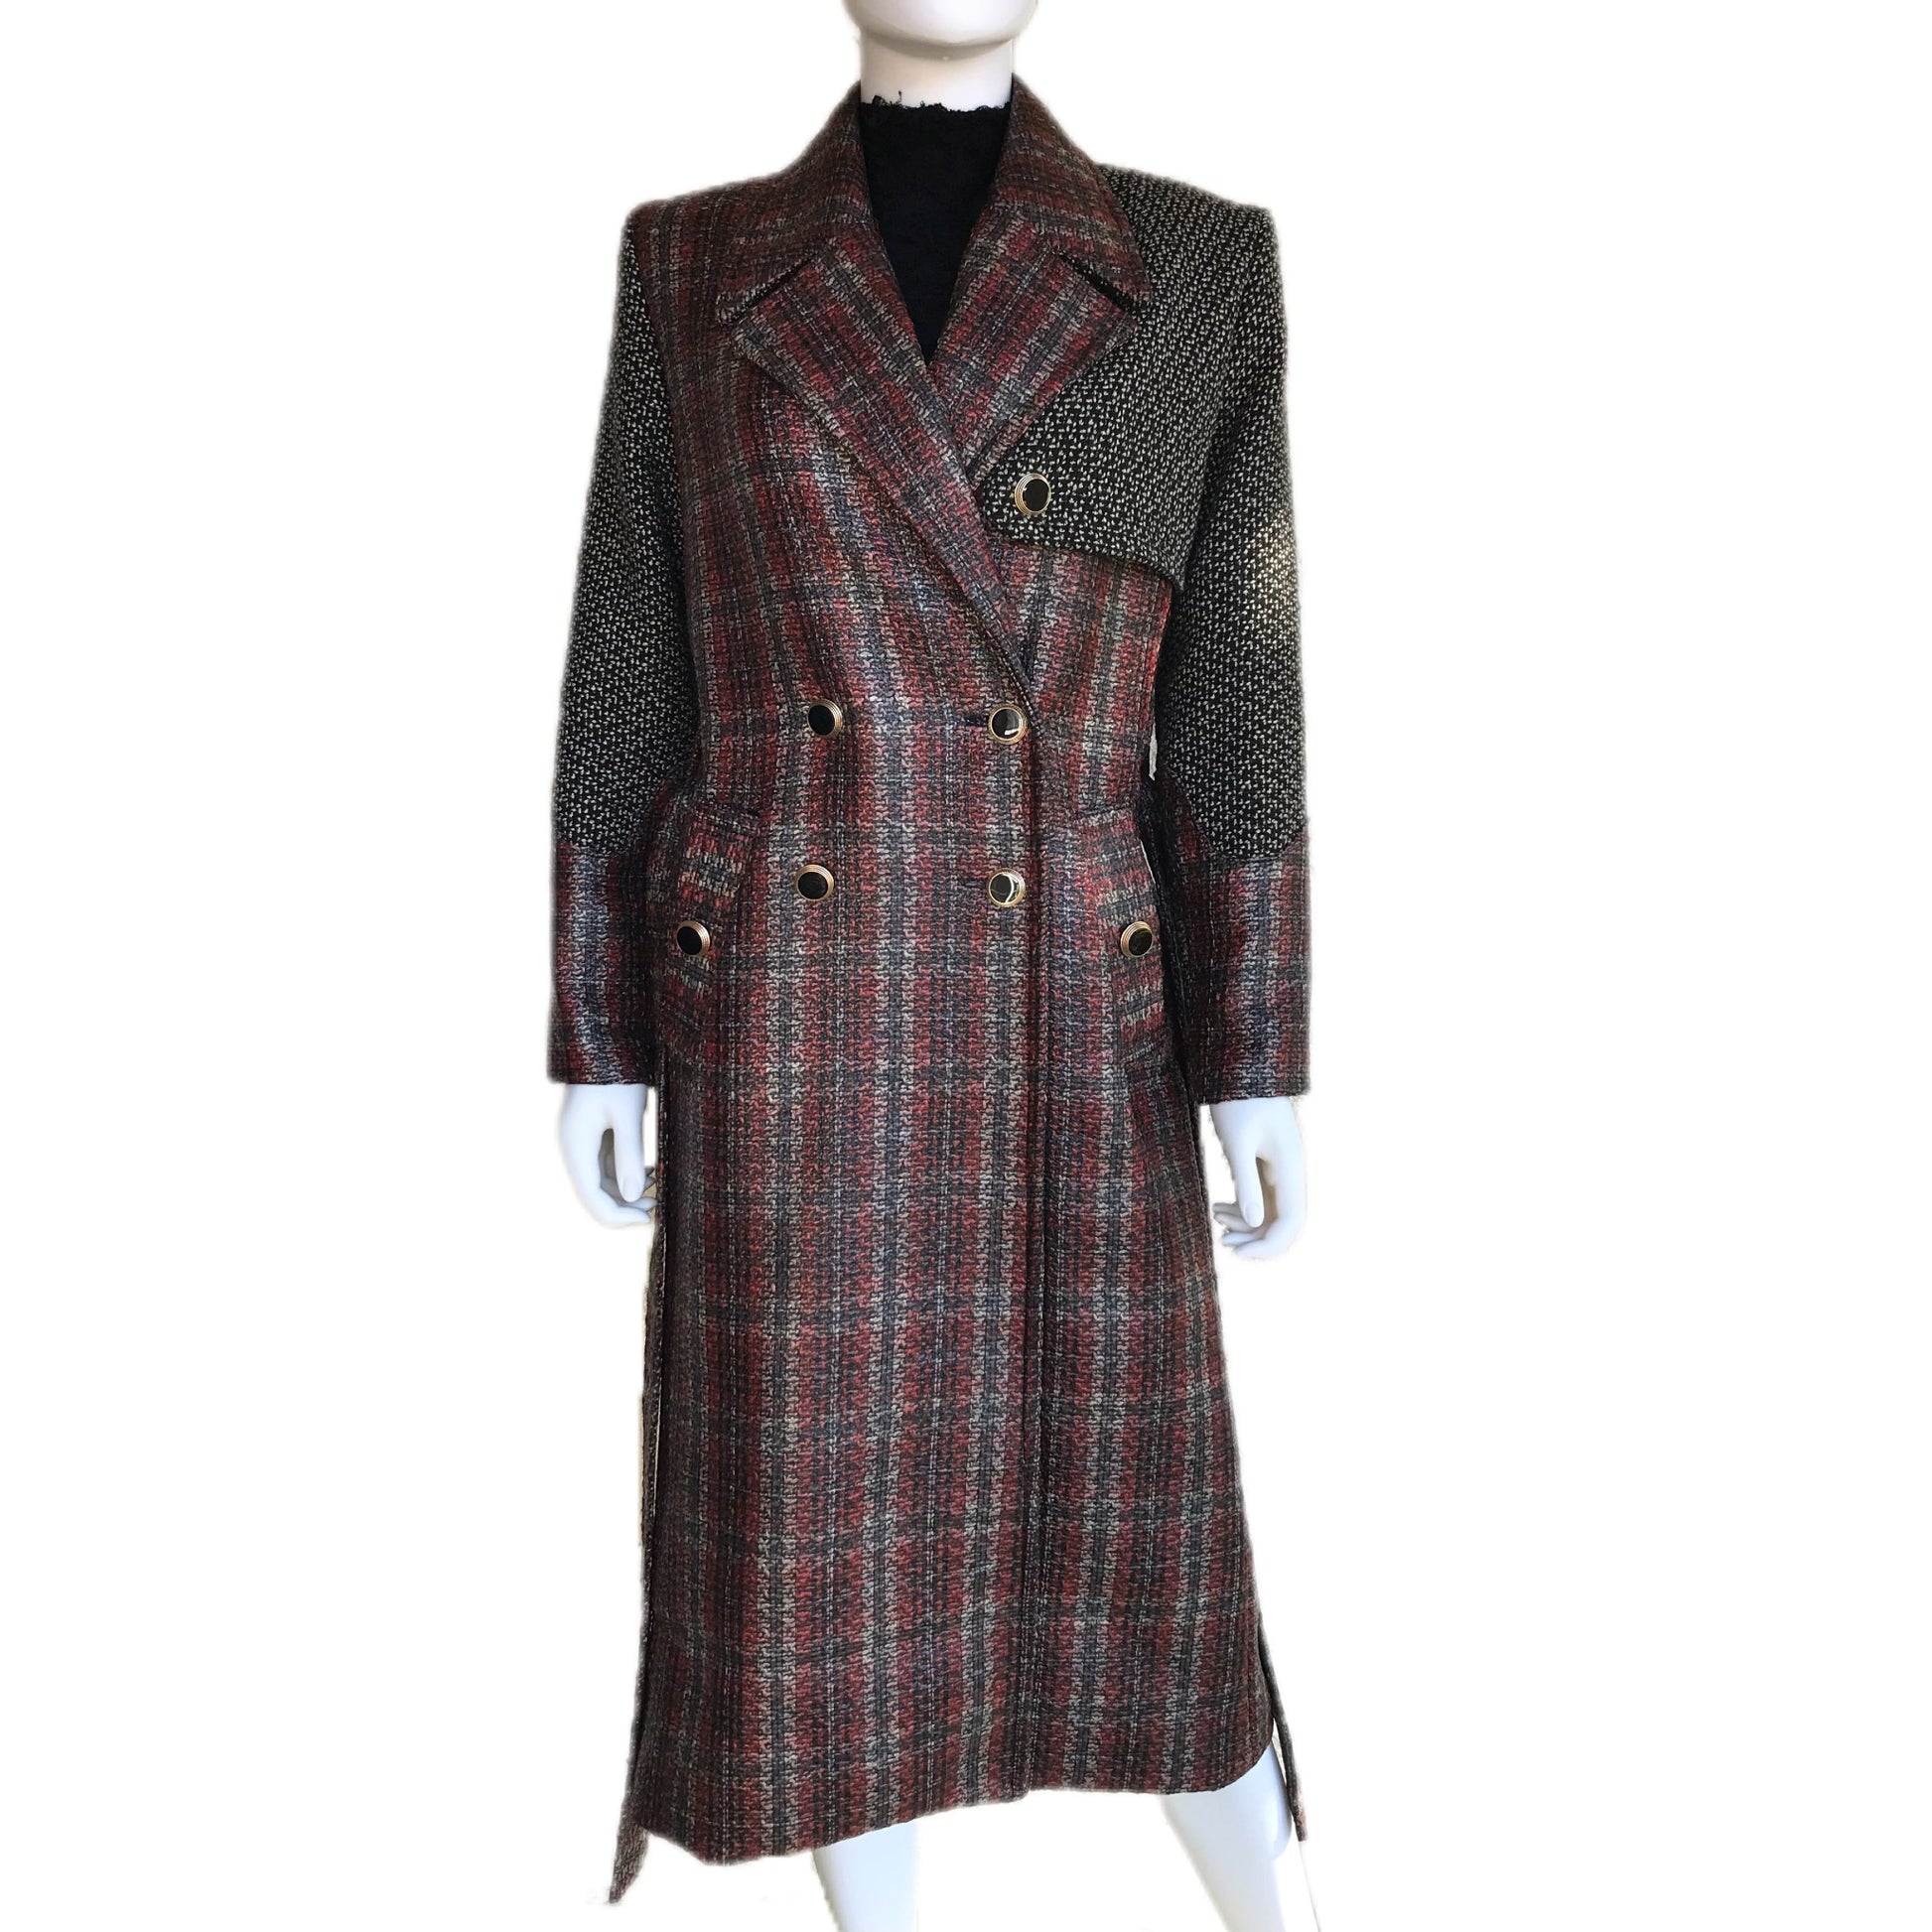 Baked Apple Plaid Laminated Tweed Trench Coat - Sz. Small - Waterproof